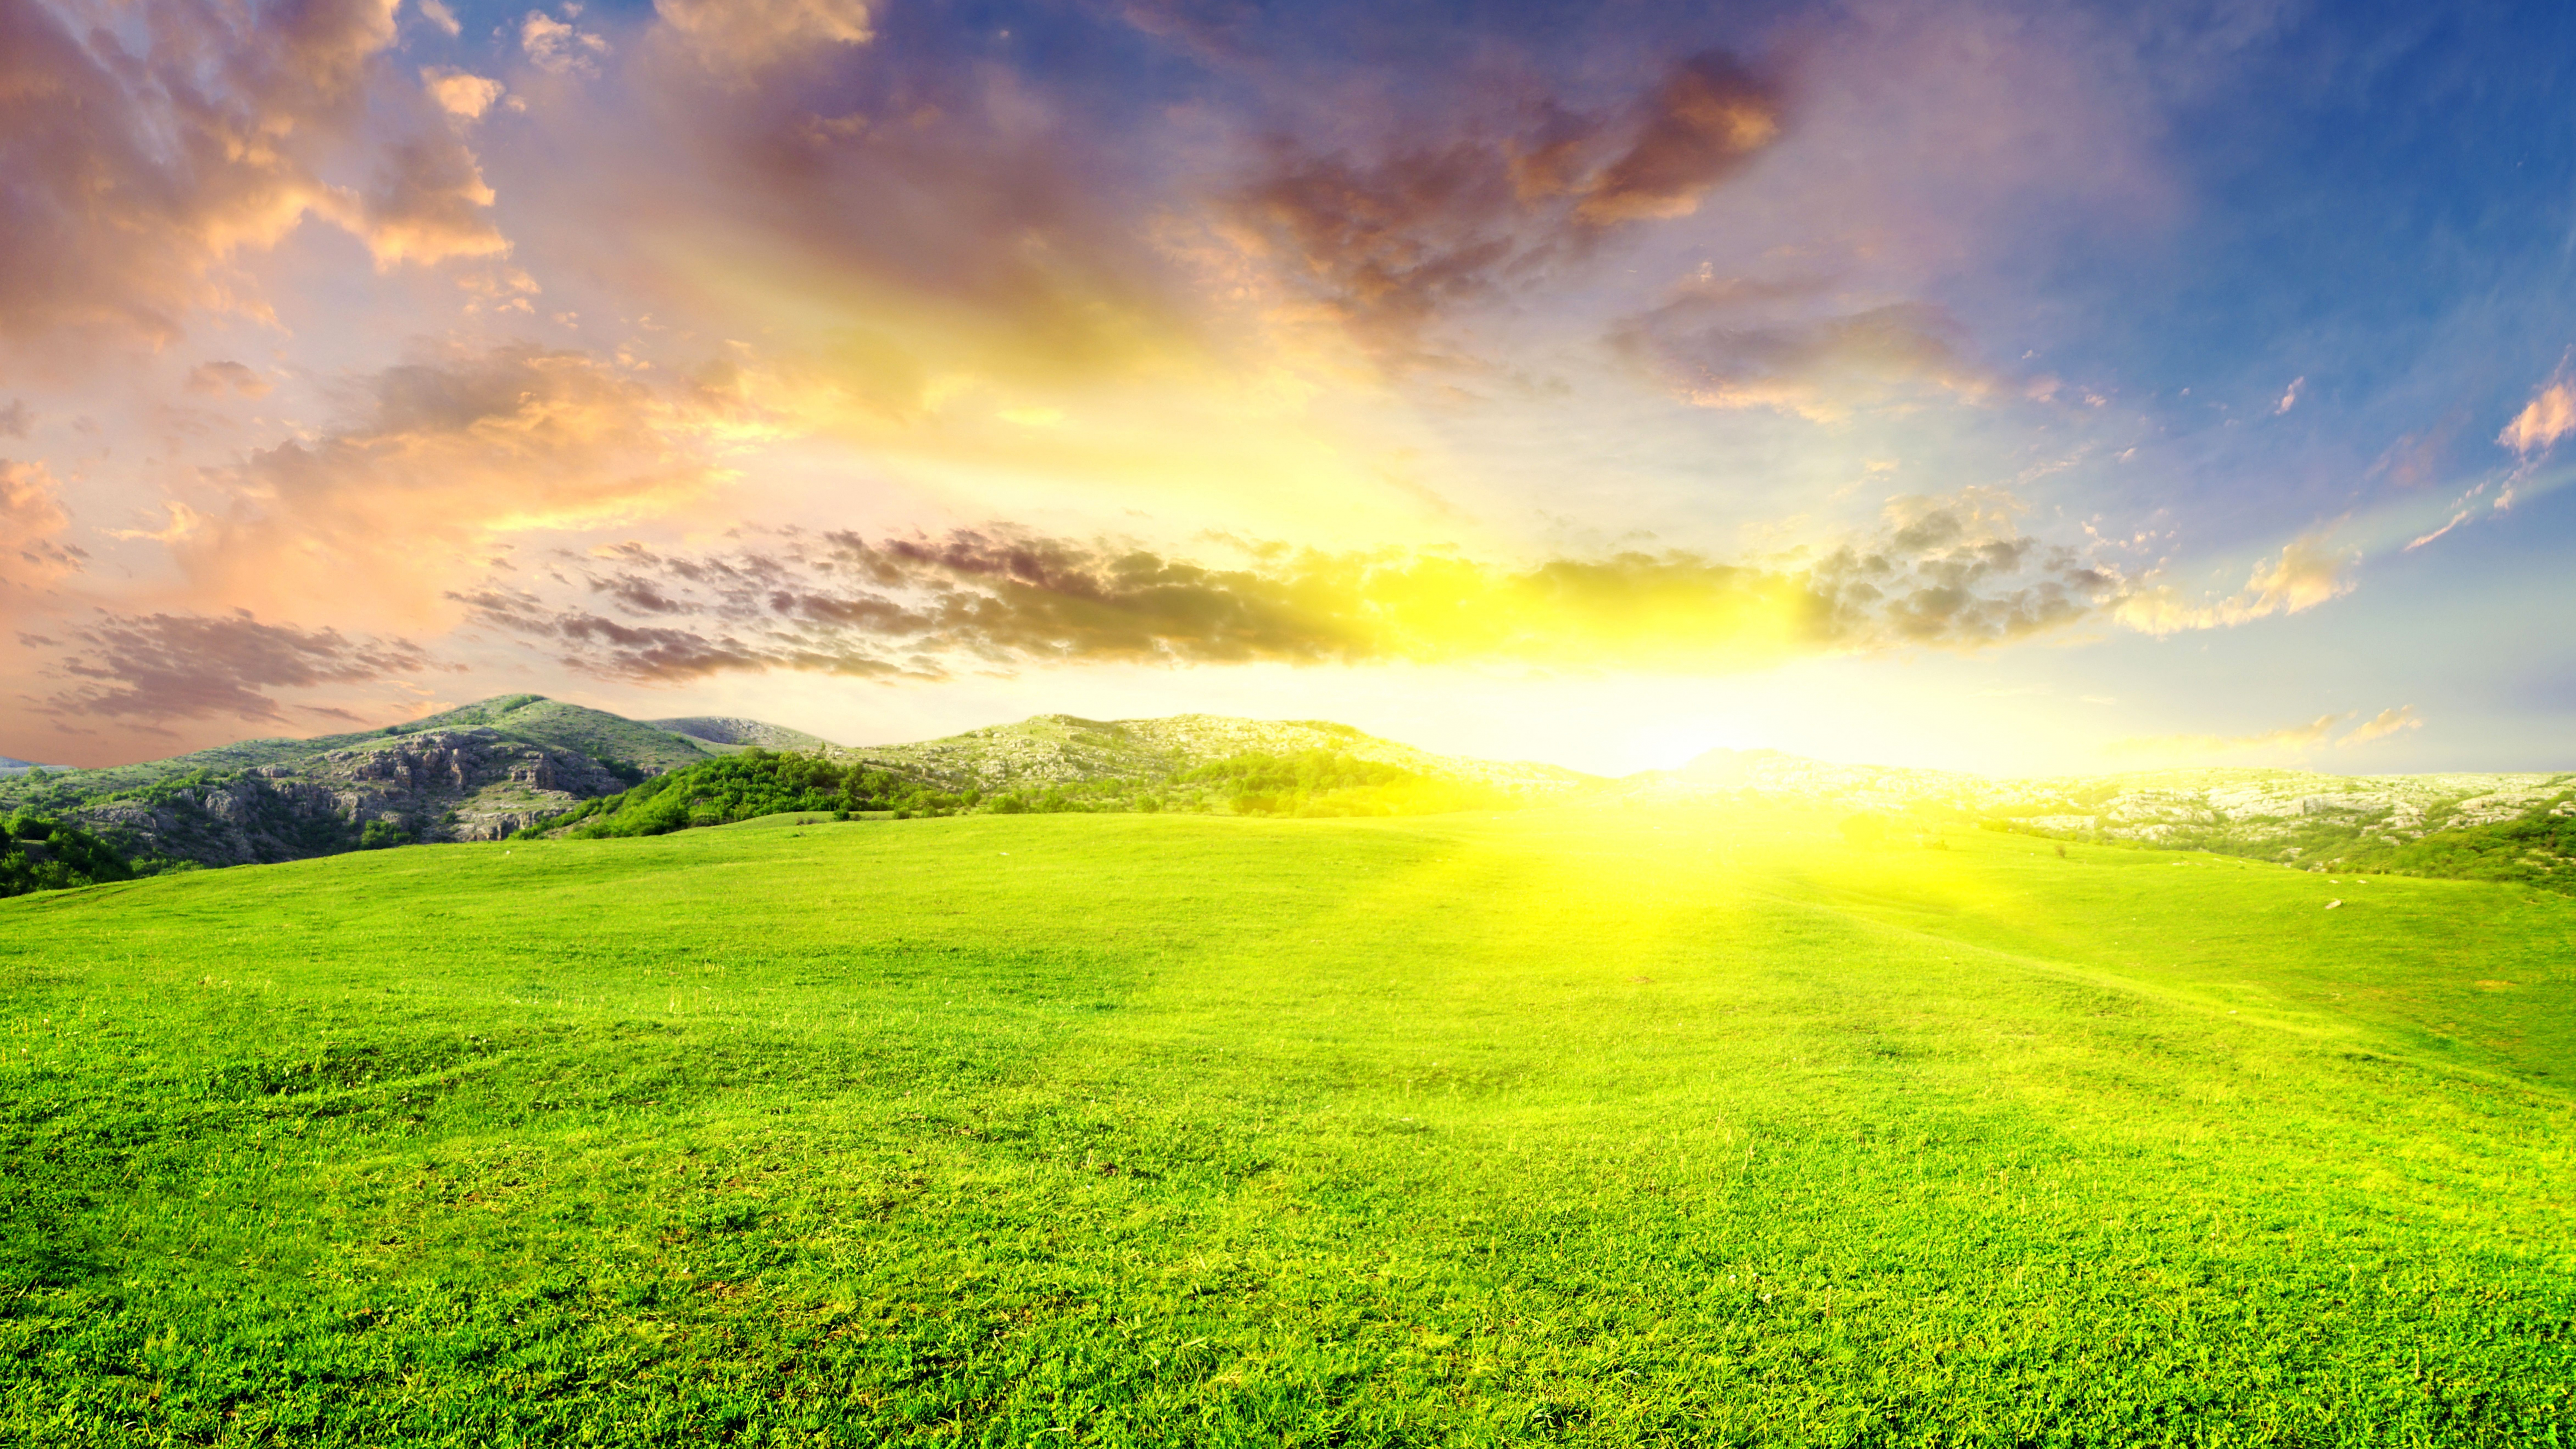 Green Grass Field Under Blue Sky and White Clouds During Daytime. Wallpaper in 7680x4320 Resolution